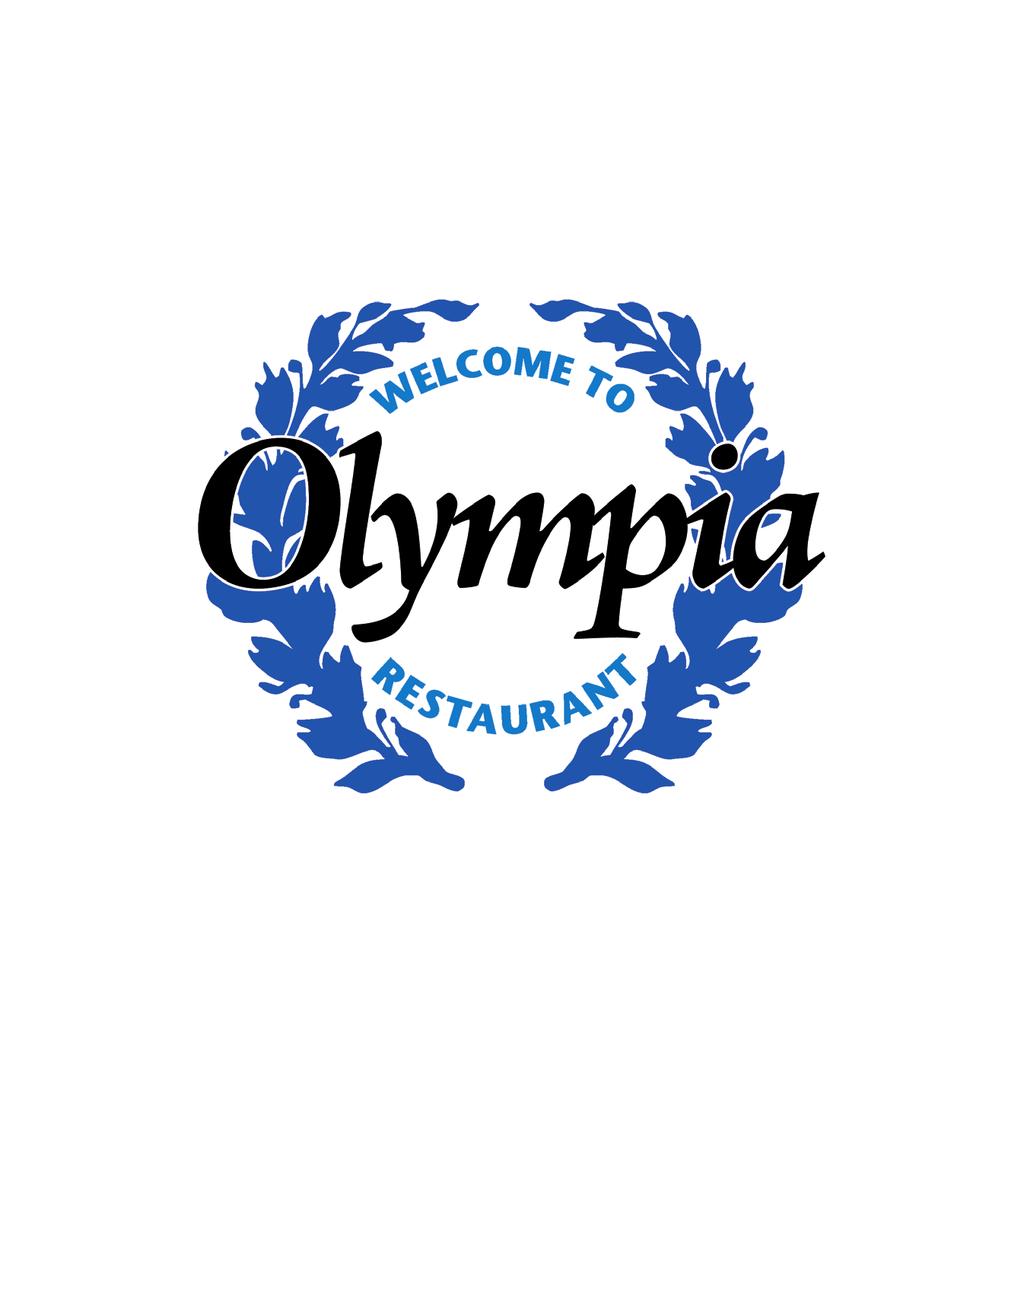 ttttttttttttttttttttttt THE OLYMPIA STORY SAM TSIRTSAKIS HAS TRAVELED HALF WAY AROUND THE WORLD & WORKED IN COUNTLESS KITCHENS TO BRING HIS RECIPES & HOSPITALITY TO WESTERN NEW YORK Sarantis Sam